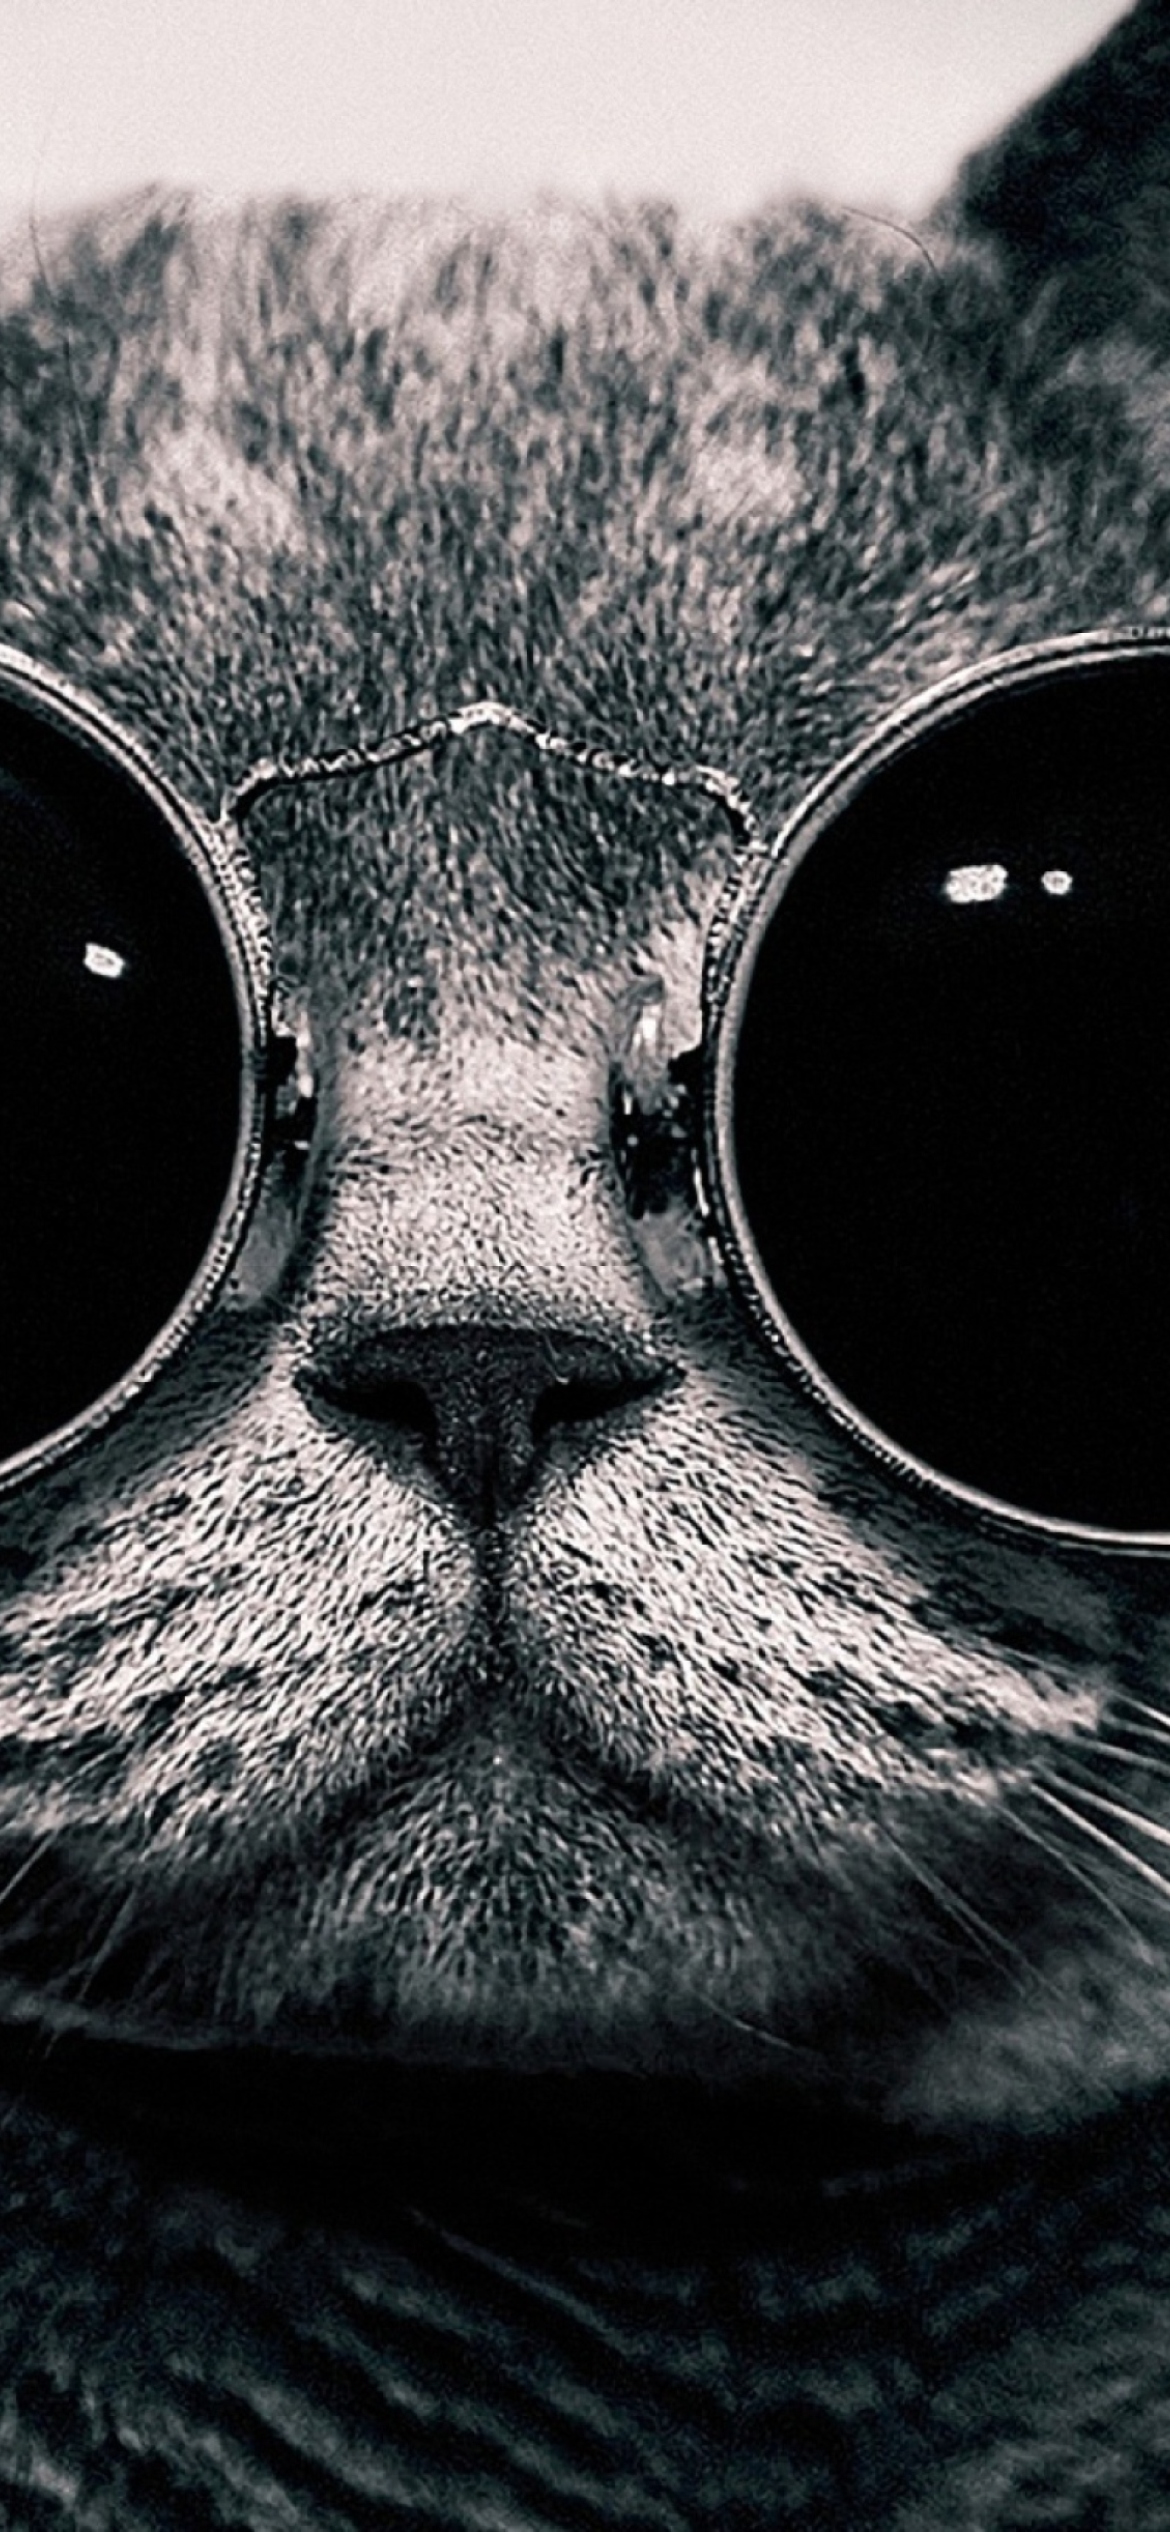 Das Cat With Glasses Wallpaper 1170x2532